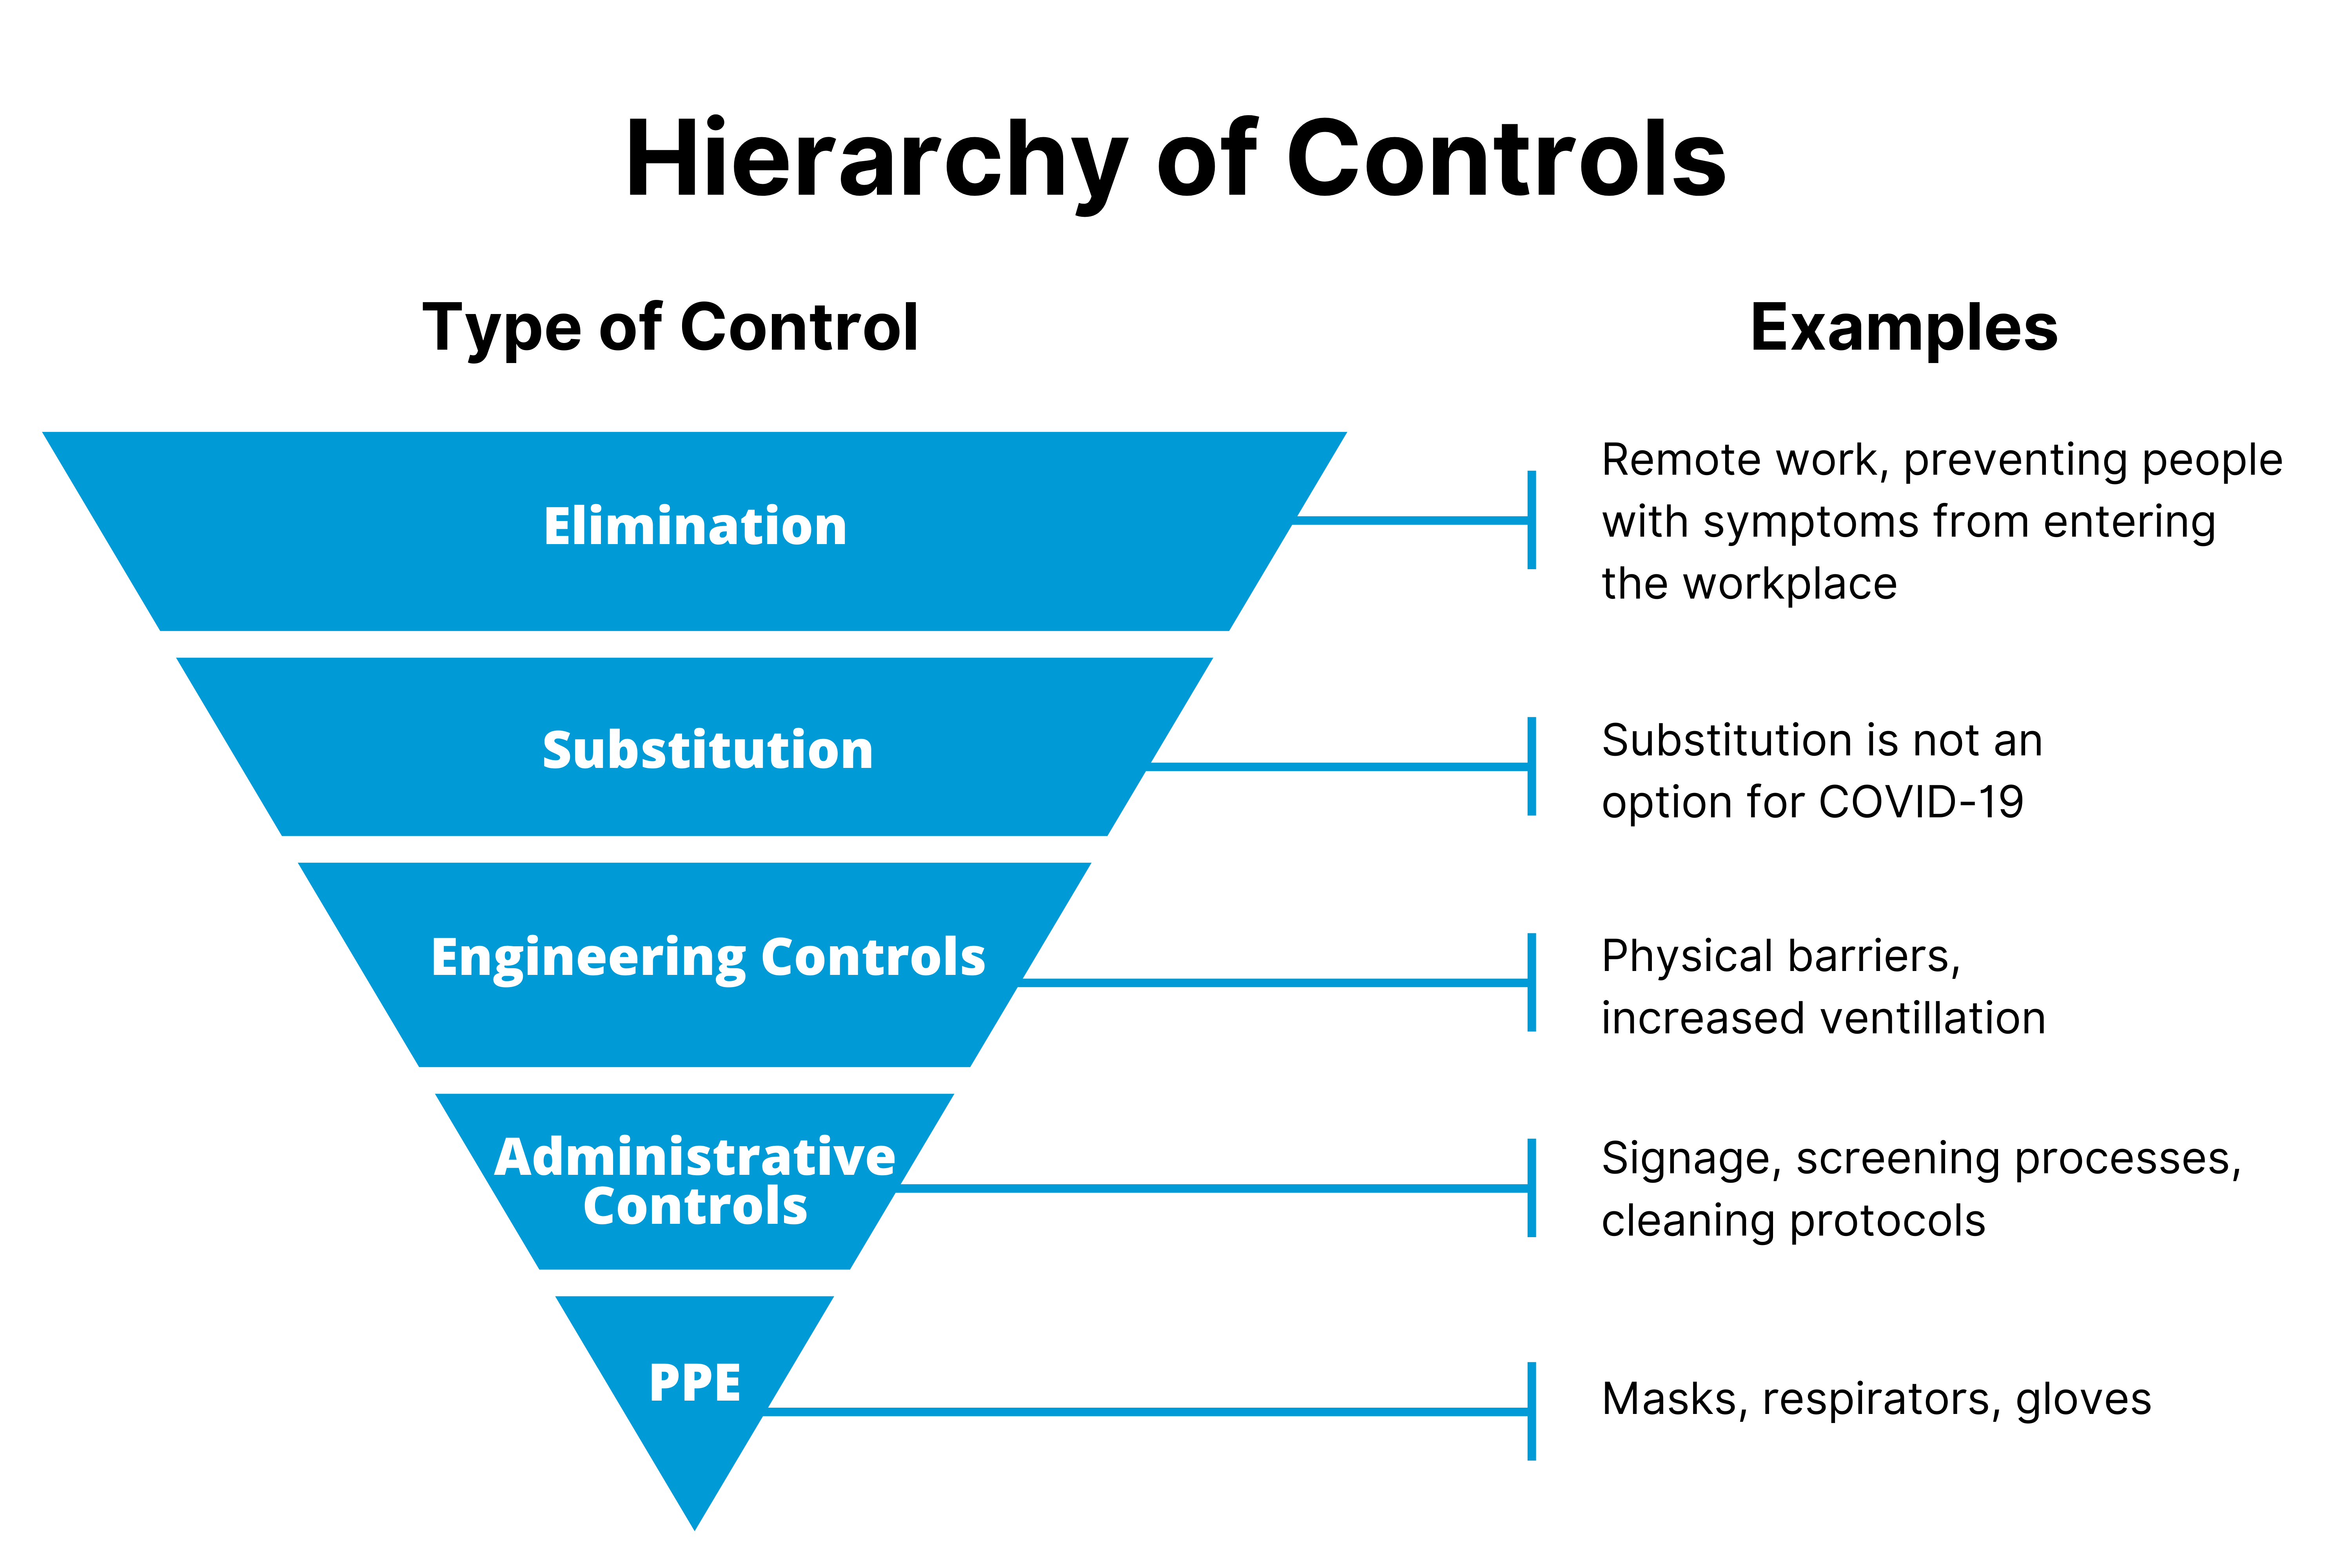 A diagram of the Hierarchy of Controls showing the type of control and a corresponding example when applied to COVID-19. Remote work and preventing people with symptoms from entering the workplace is an example of elimination. Substitution is not an option for COVID-19. Physical barriers and increased ventilation are engineering controls. Signage, screening, and cleaning protocols are administrative controls. Masks, respirators, gloves are PPE controls.